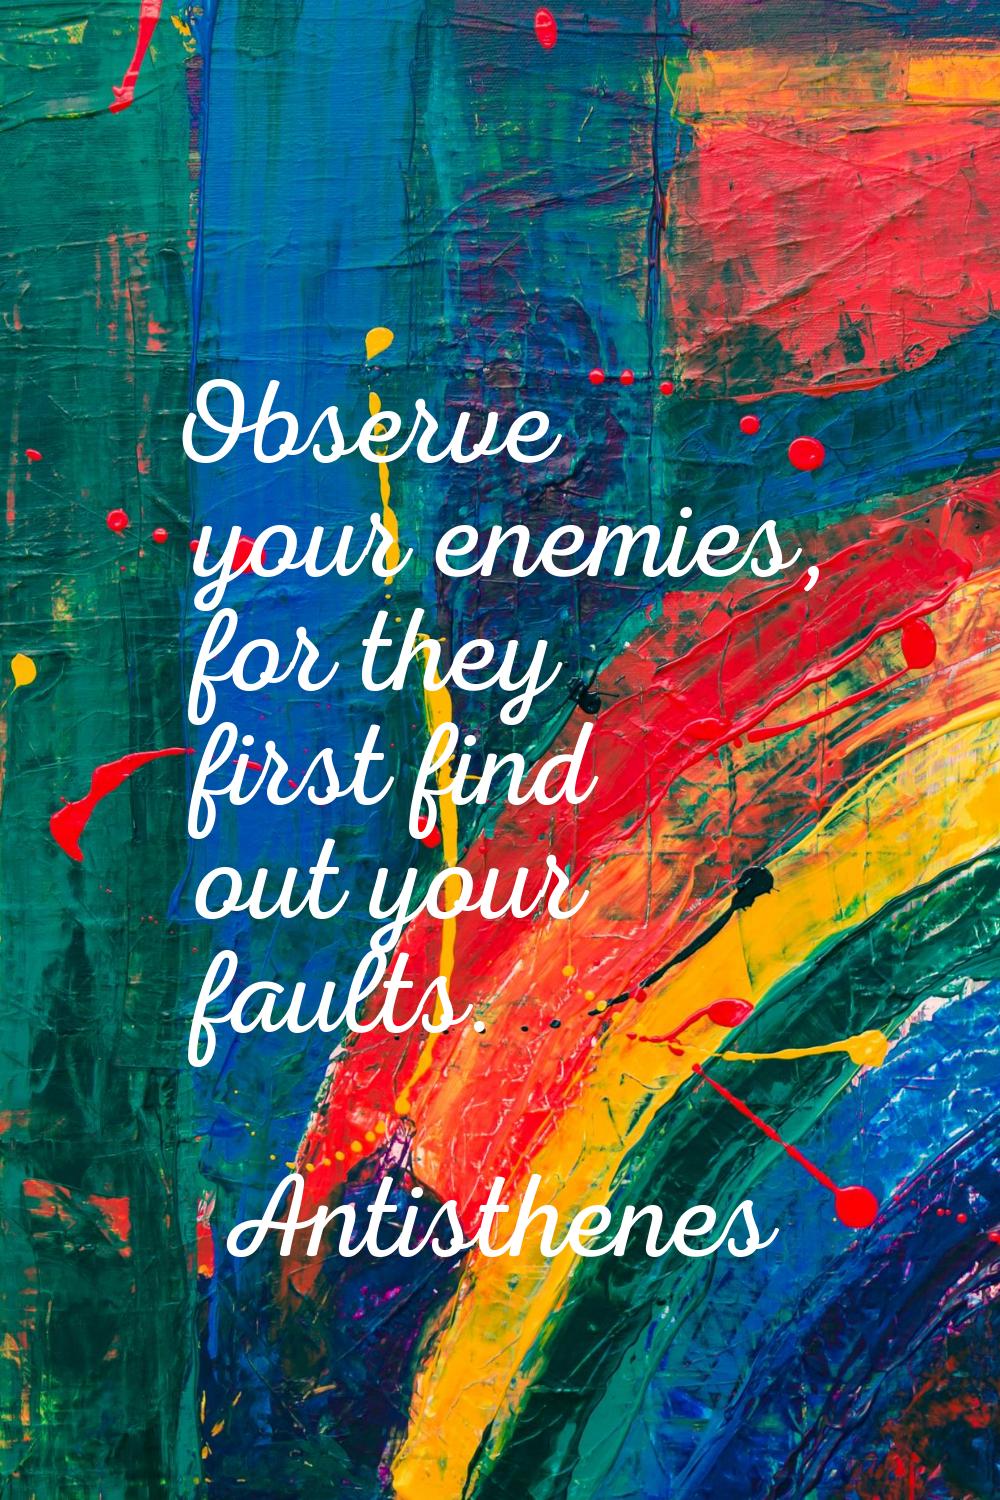 Observe your enemies, for they first find out your faults.